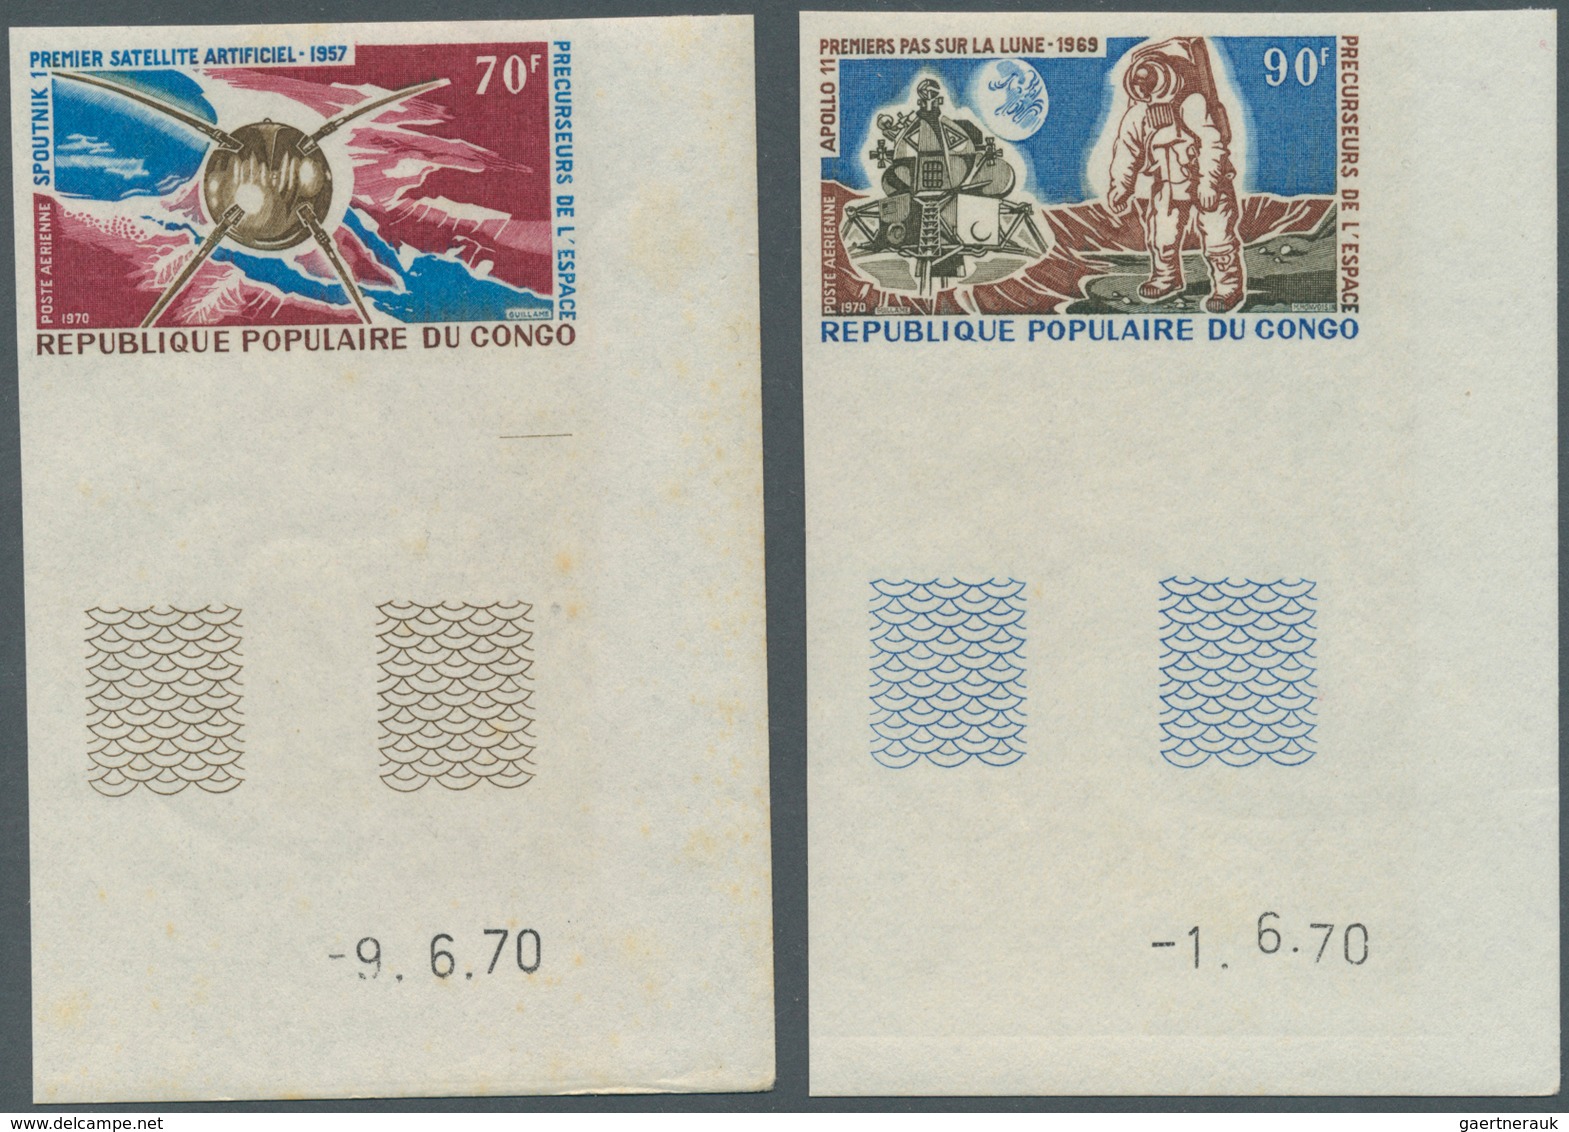 24913 Thematische Philatelie: 1970s/1990s. Lot with about 70 proof and color proof stamps of former French